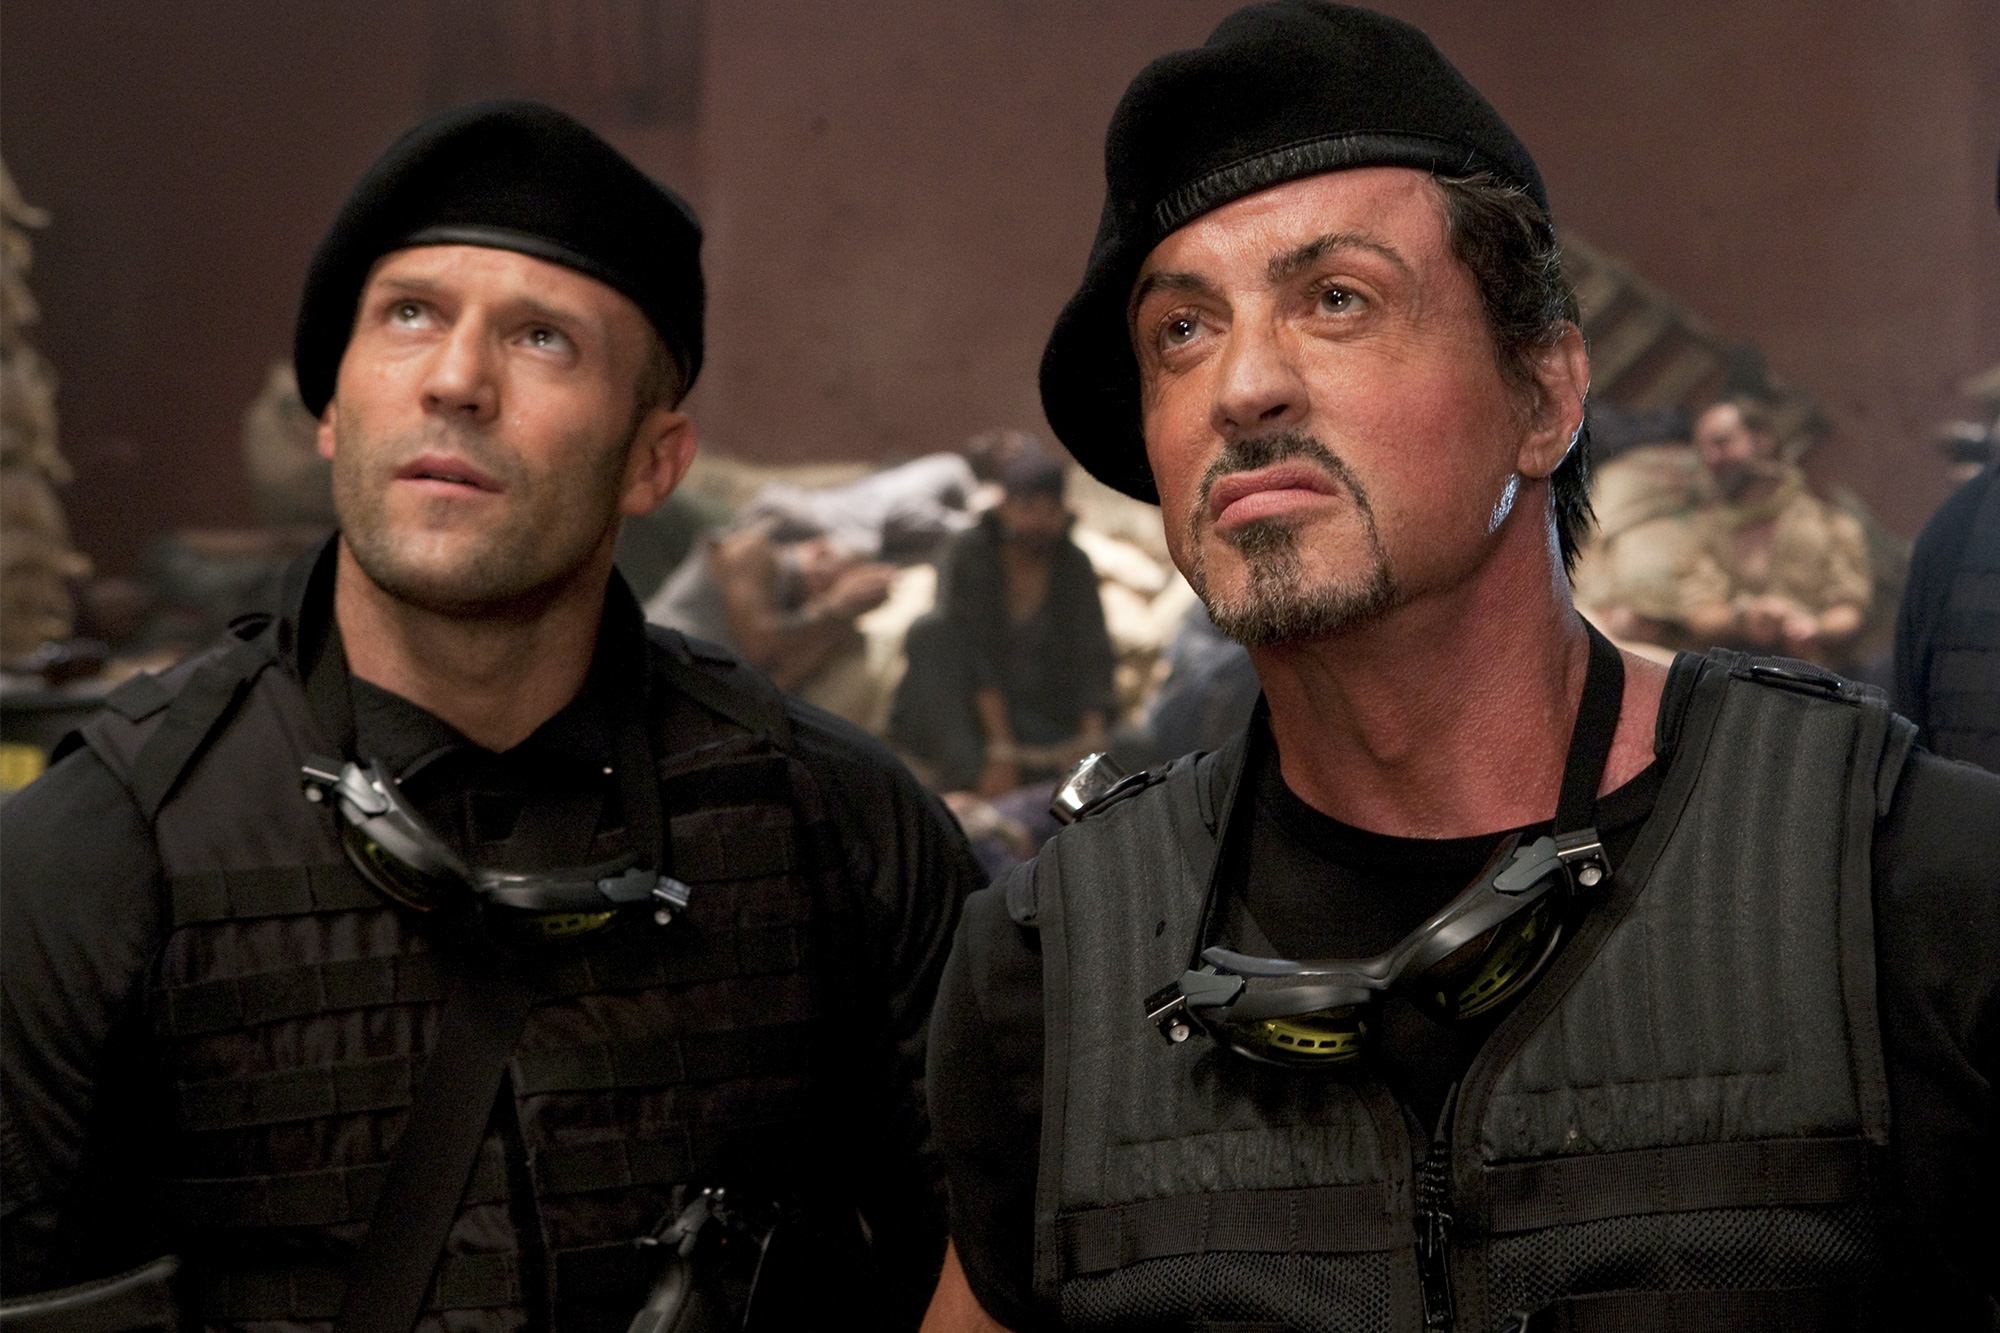 The Expendables (2010)
Lee Christmas (Jason Statham, left), Barney Ross (Sylvester Stallone, center) and Toll Road (Randy Couture, right)
CR: Karen Ballard/Lionsgate